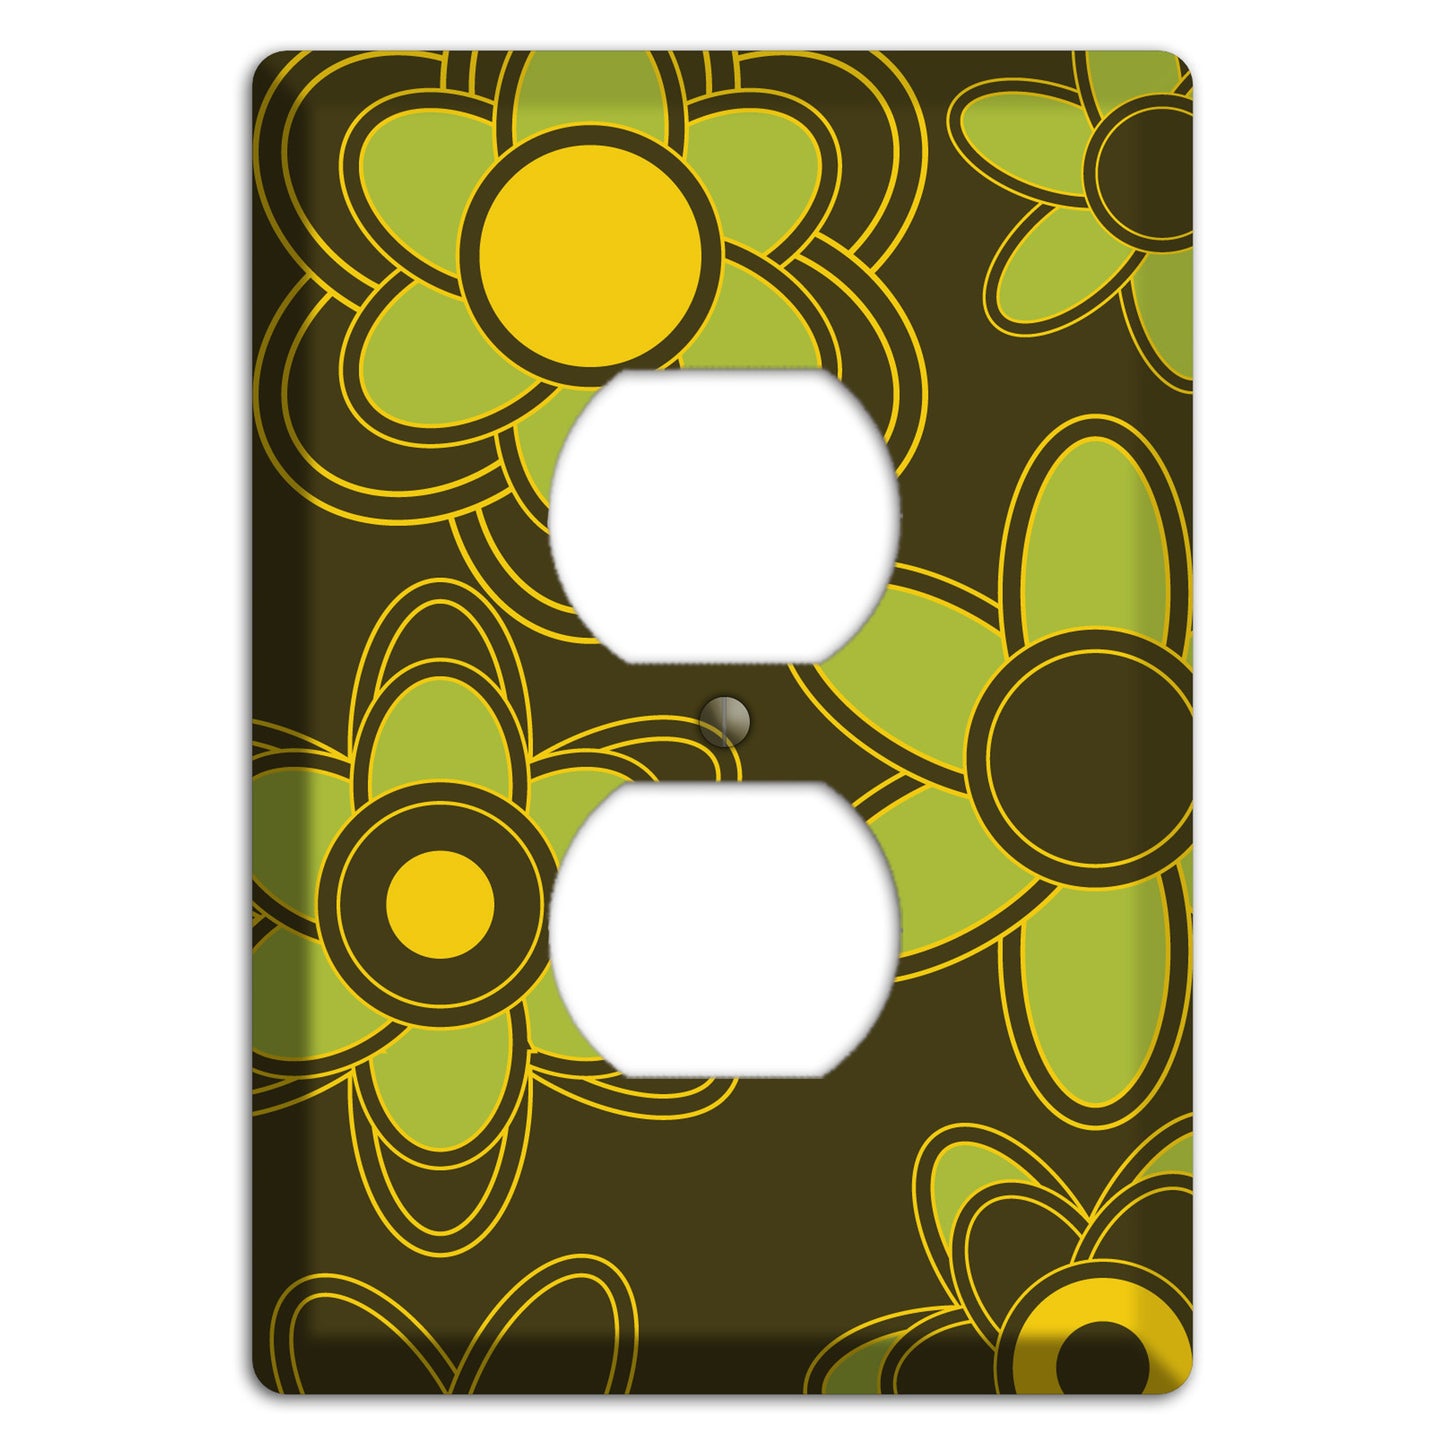 Brown with Lime Retro Floral Contour Duplex Outlet Wallplate